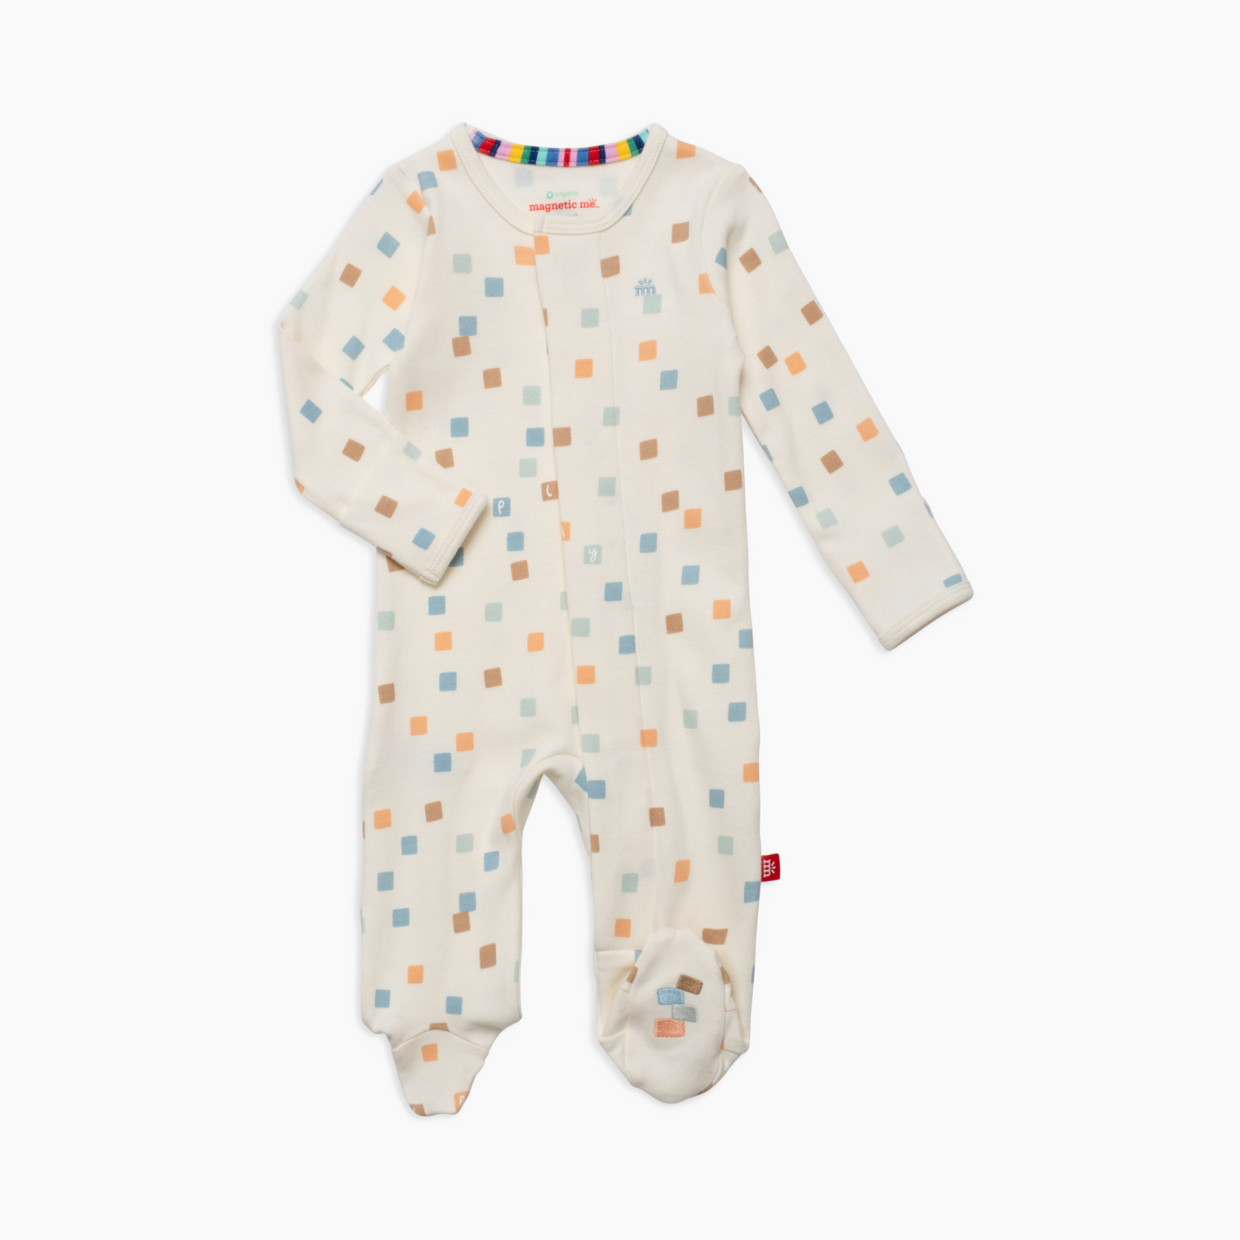 Magnetic Me Organic Cotton Magnetic Footie - Hip To Be Square, 3-6 M.